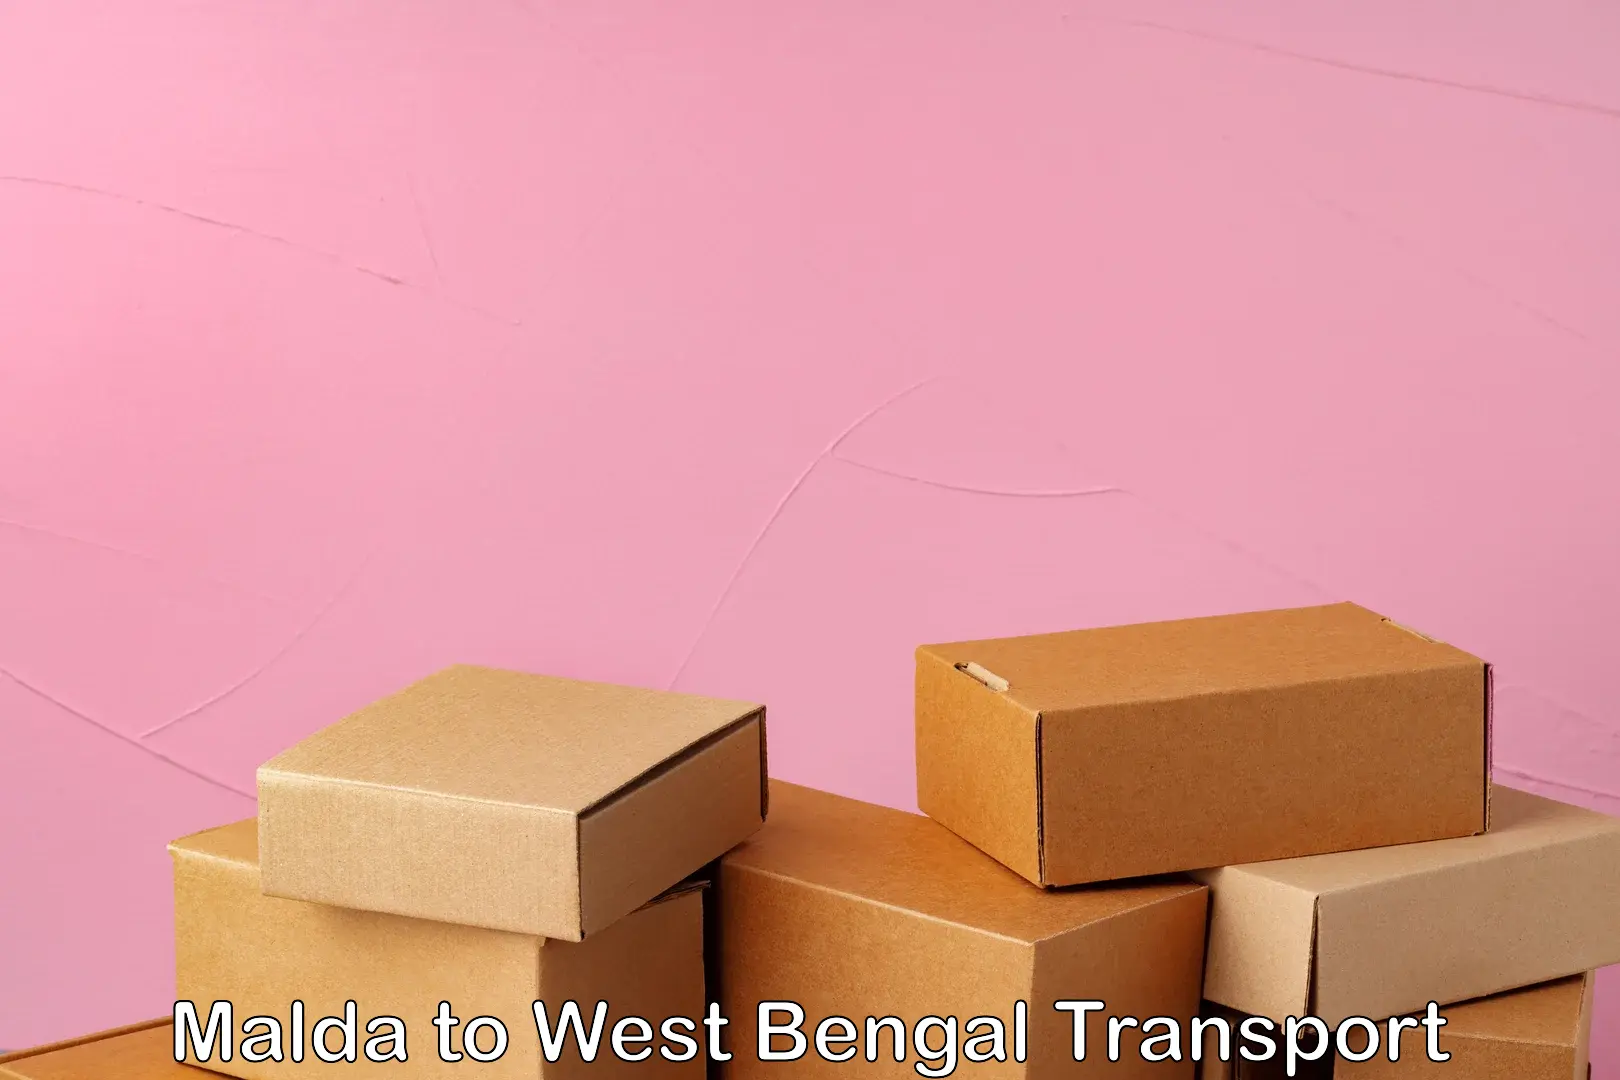 Air freight transport services Malda to West Bengal